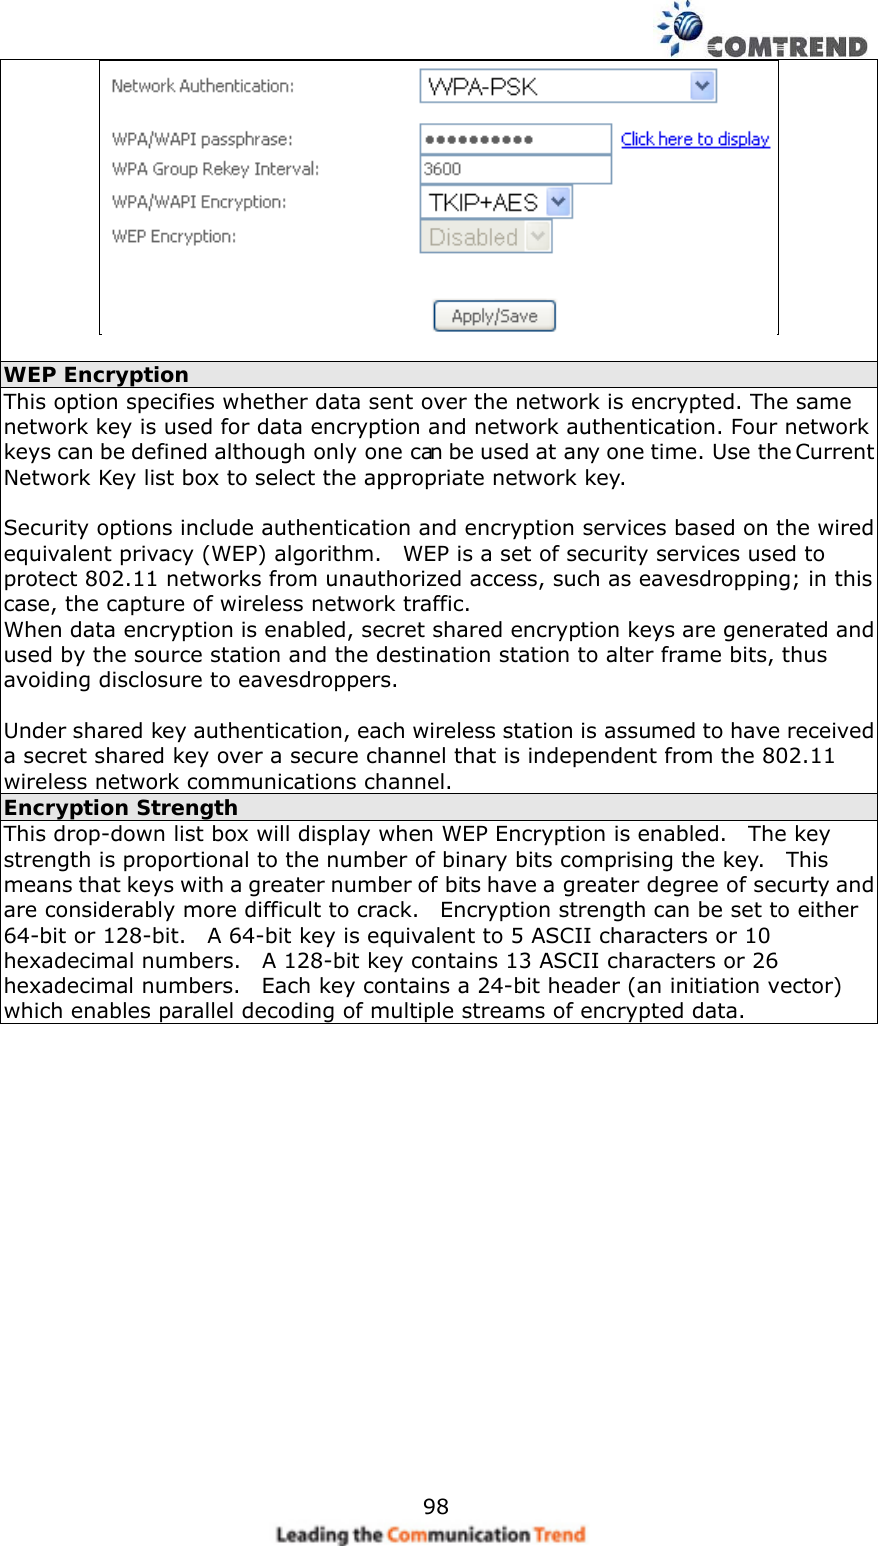    98  WEP Encryption This option specifies whether data sent over the network is encrypted. The same network key is used for data encryption and network authentication. Four network keys can be defined although only one can be used at any one time. Use the Current Network Key list box to select the appropriate network key.    Security options include authentication and encryption services based on the wired equivalent privacy (WEP) algorithm.    WEP is a set of security services used to protect 802.11 networks from unauthorized access, such as eavesdropping; in this case, the capture of wireless network traffic.     When data encryption is enabled, secret shared encryption keys are generated and used by the source station and the destination station to alter frame bits, thus avoiding disclosure to eavesdroppers.  Under shared key authentication, each wireless station is assumed to have received a secret shared key over a secure channel that is independent from the 802.11 wireless network communications channel. Encryption Strength This drop-down list box will display when WEP Encryption is enabled.    The key strength is proportional to the number of binary bits comprising the key.    This means that keys with a greater number of bits have a greater degree of security and are considerably more difficult to crack.    Encryption strength can be set to either 64-bit or 128-bit.    A 64-bit key is equivalent to 5 ASCII characters or 10 hexadecimal numbers.    A 128-bit key contains 13 ASCII characters or 26 hexadecimal numbers.    Each key contains a 24-bit header (an initiation vector) which enables parallel decoding of multiple streams of encrypted data.    